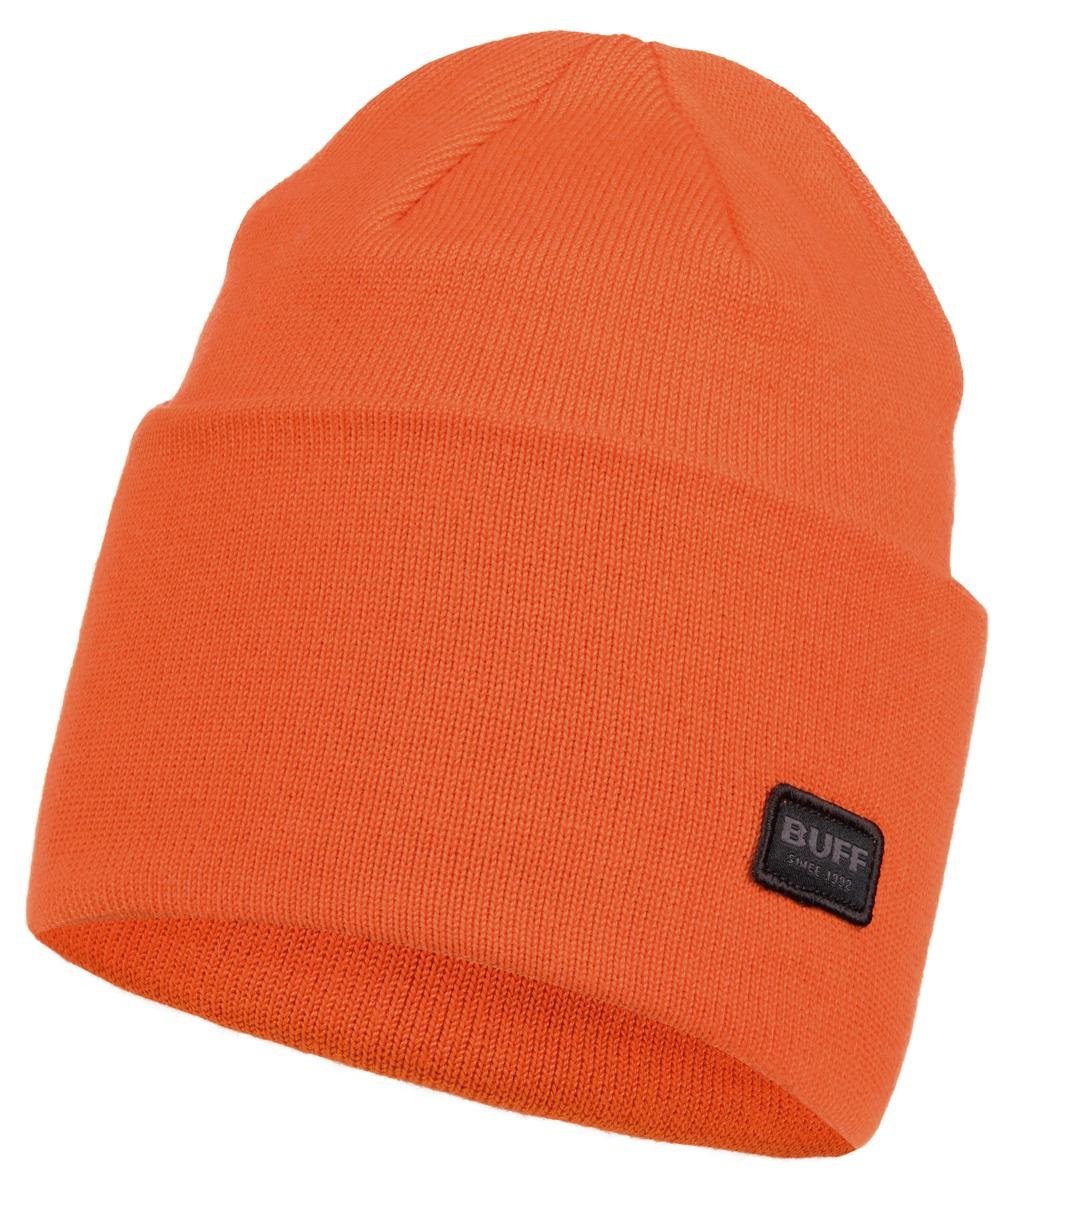 Шапка Buff Knitted Hat Niels Tangerine US:One size, 126457.202.10.00 шапка buff knitted hat niels niels evo silversage us one size 126457 313 10 00